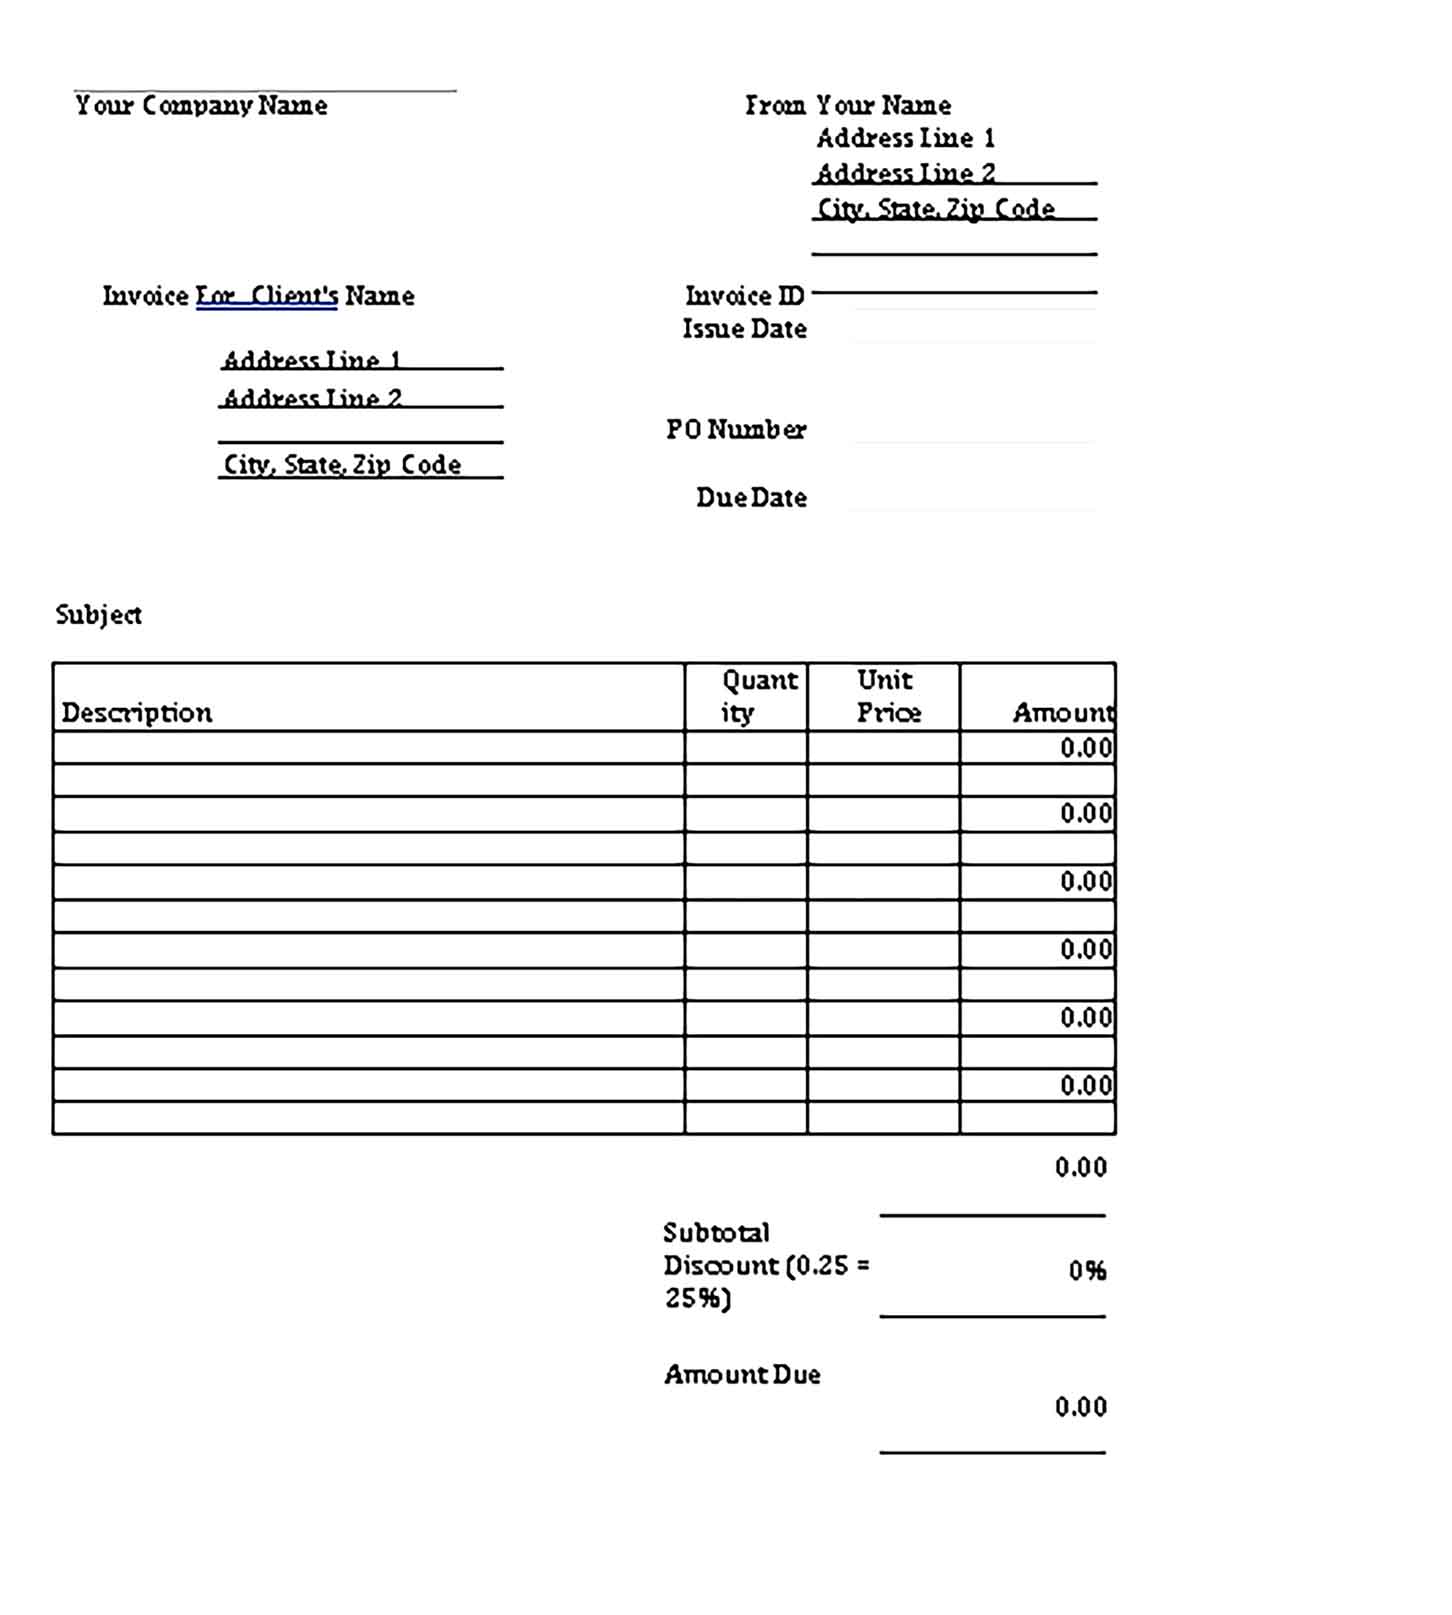 Sample Templates Home Bakery Invoice